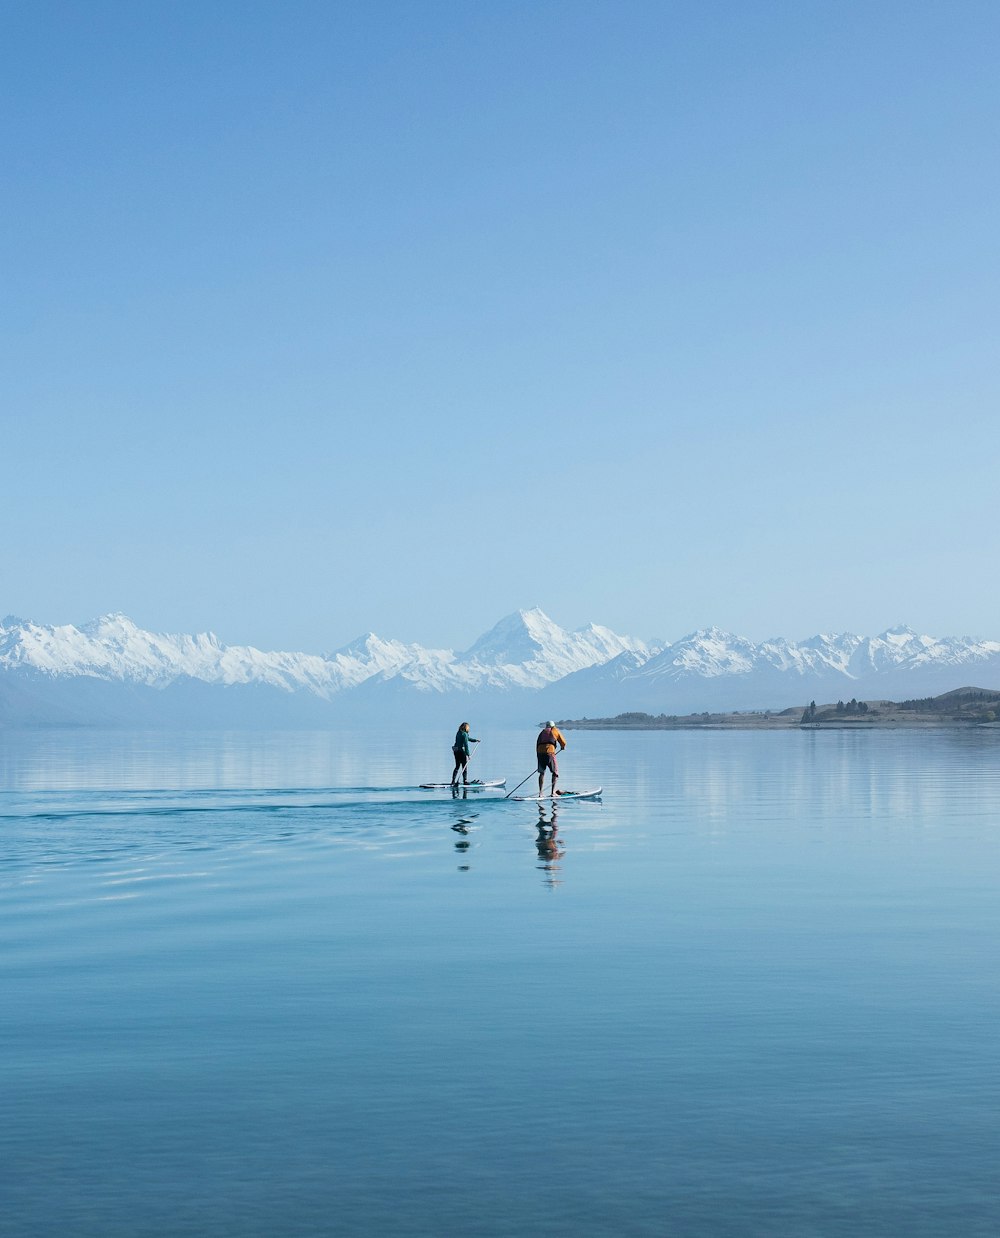 two people stand on surfboards in the middle of a lake